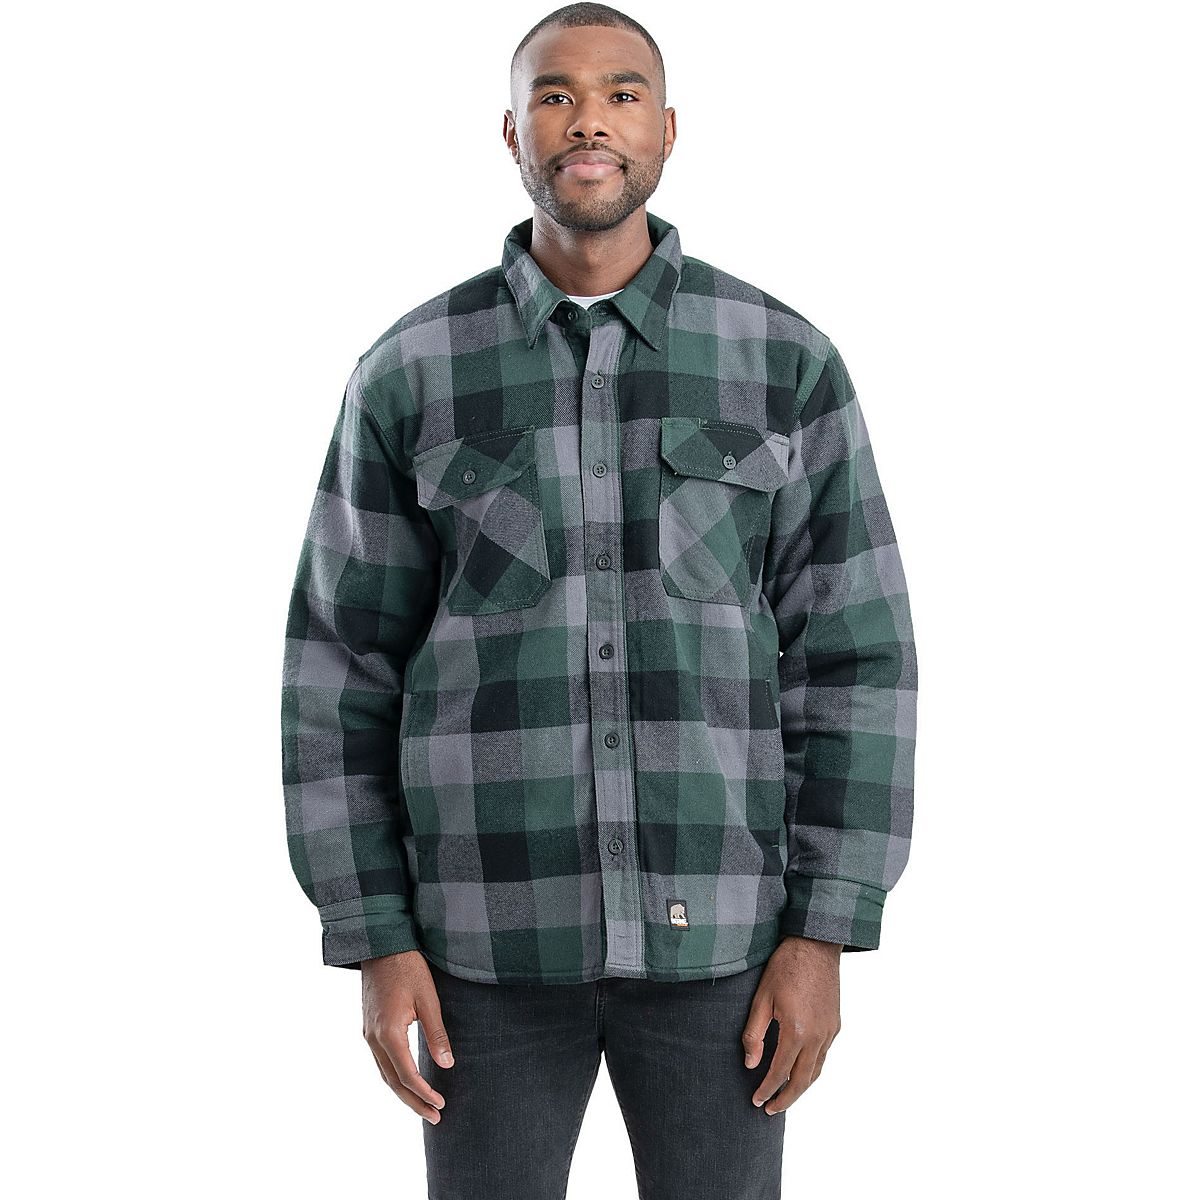 Berne Men's Flannel Shirt Jacket | Free Shipping at Academy